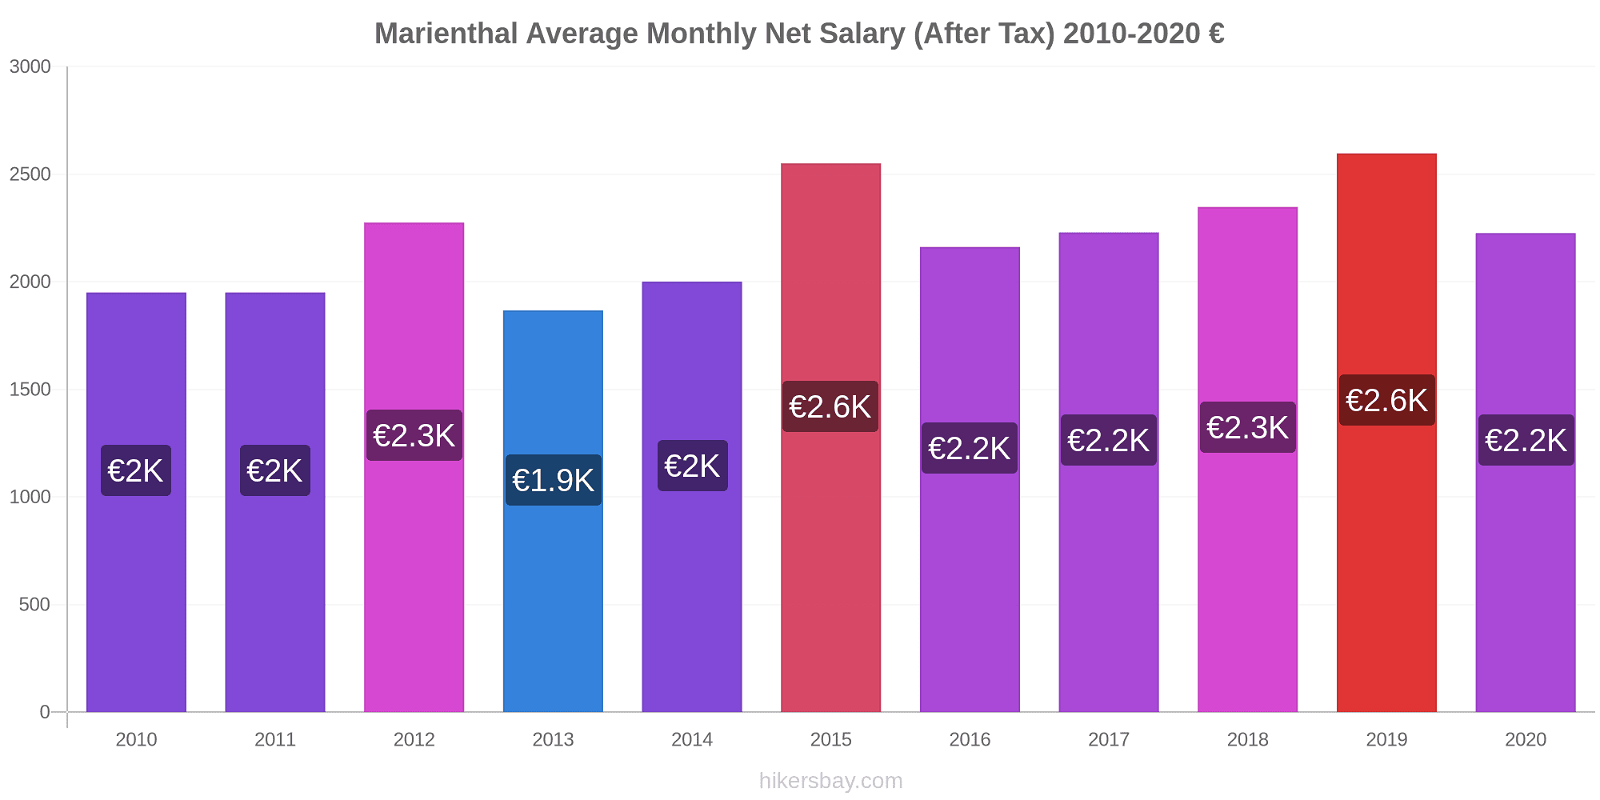 Marienthal price changes Average Monthly Net Salary (After Tax) hikersbay.com